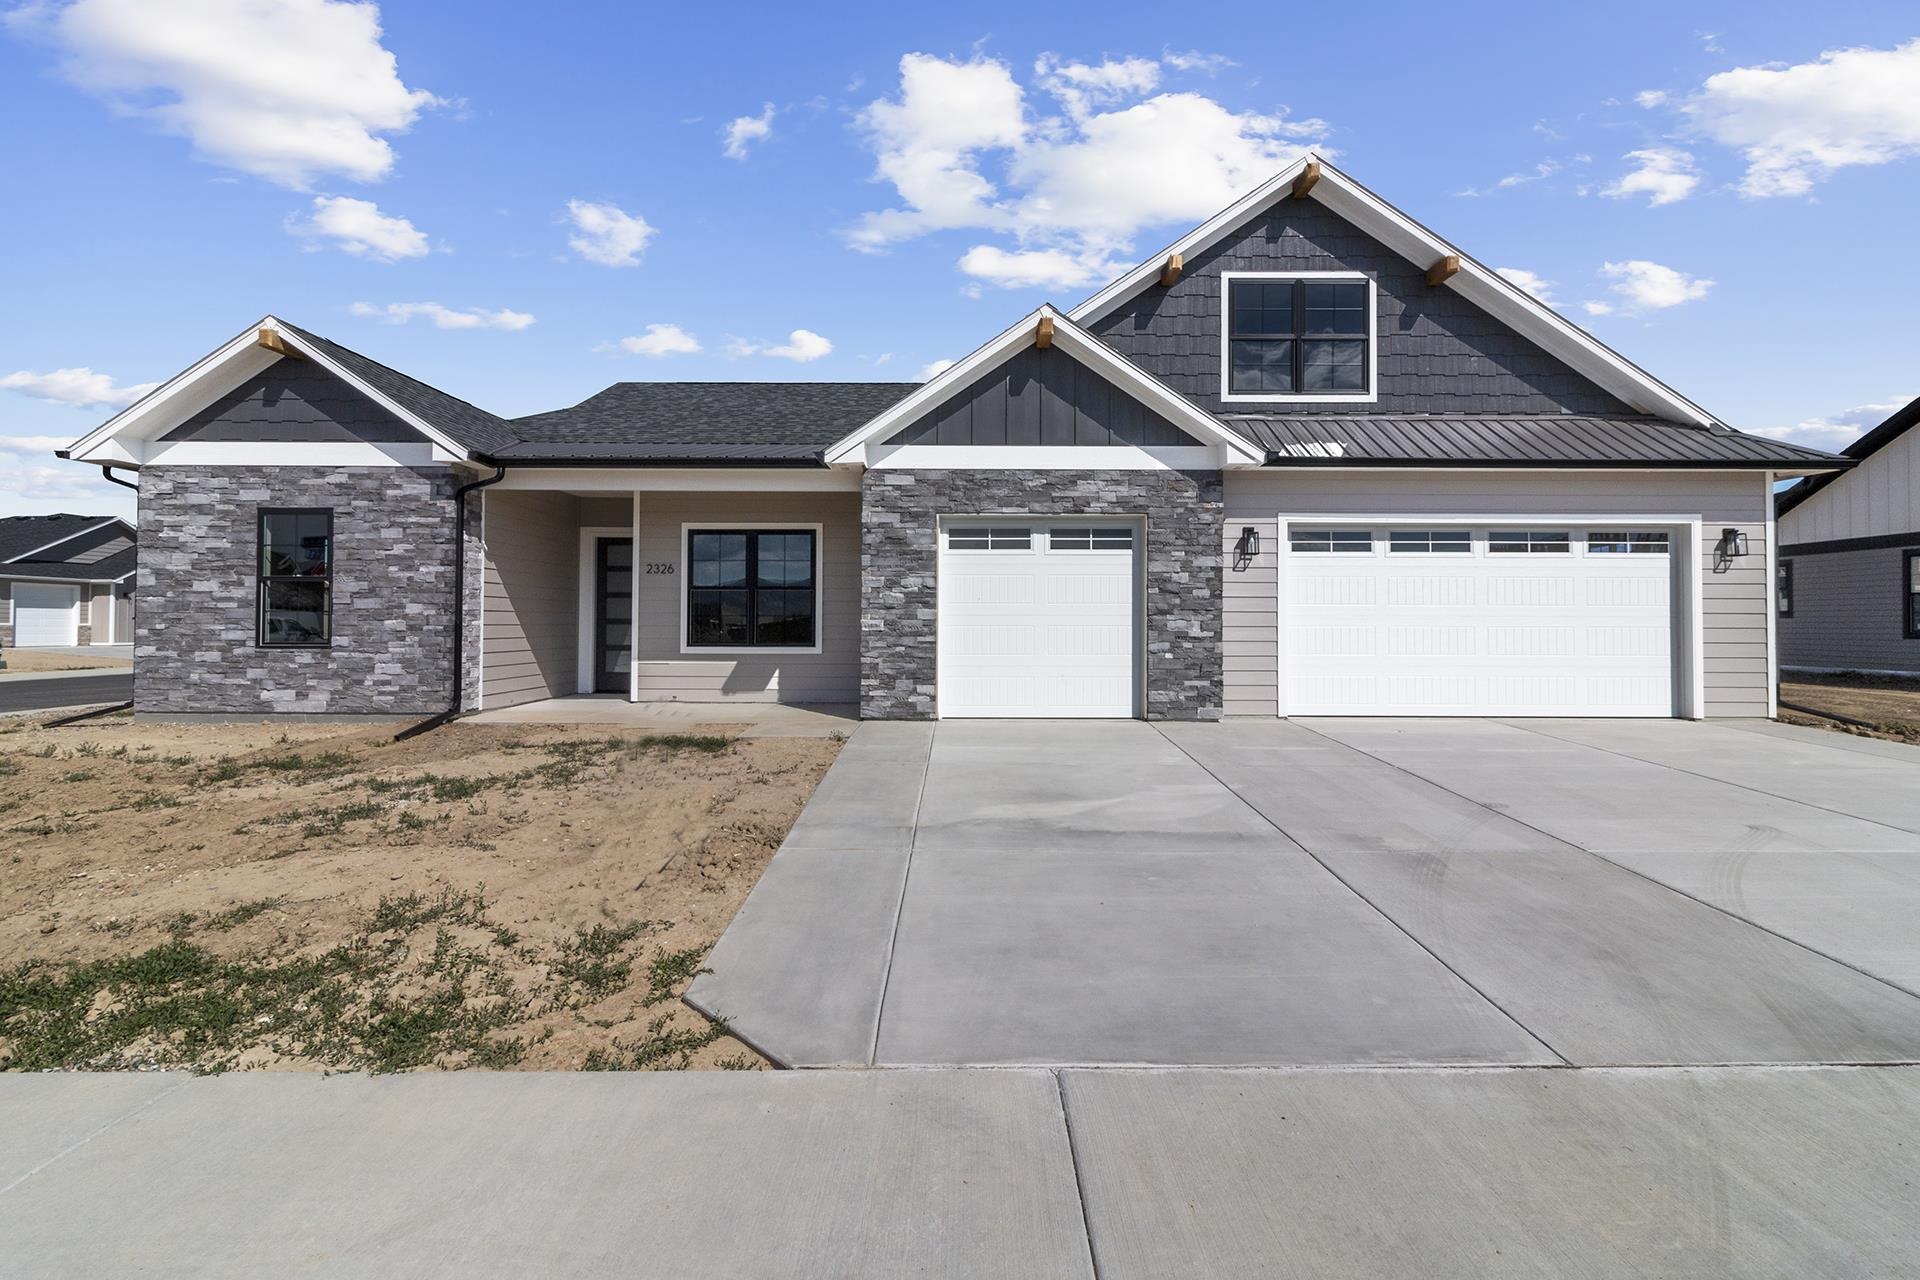 NEW CONSTRUCTION by TreyTyn Homes, LLC in northwest Grand Junction's country-chic subdivision, Silver Spur! This open & flowing ranch style floor plan also features an upstairs bonus room, complete with full bathroom, for added functional living space! The covered front door leads you into the grand entry that allows for convenient access to the front two bedrooms, which also share a jack-and-jill bathroom. Additional office space (or additional bedroom, as it has spacious closet) sits behind attractive and modern barn sliding doors. The open living room features cathedral ceilings and a cozy fireplace for added ambiance. The chef's kitchen features a large island, premium granite countertops, upgraded cabinets, unique tile backsplash, upgraded stainless appliances and durable luxury vinyl plank flooring! The split bedroom floor plan allows for a private and spacious master suite (which sits adjacent to the laundry area for added convenience!), that's complete with oversized walk-in closet  and en-suite bathroom with dual vanities, custom walk-in shower and private lavatory. Covered back patio is the perfect space for relaxation and enjoyment of your spacious backyard area. RV parking space on east side of the property!